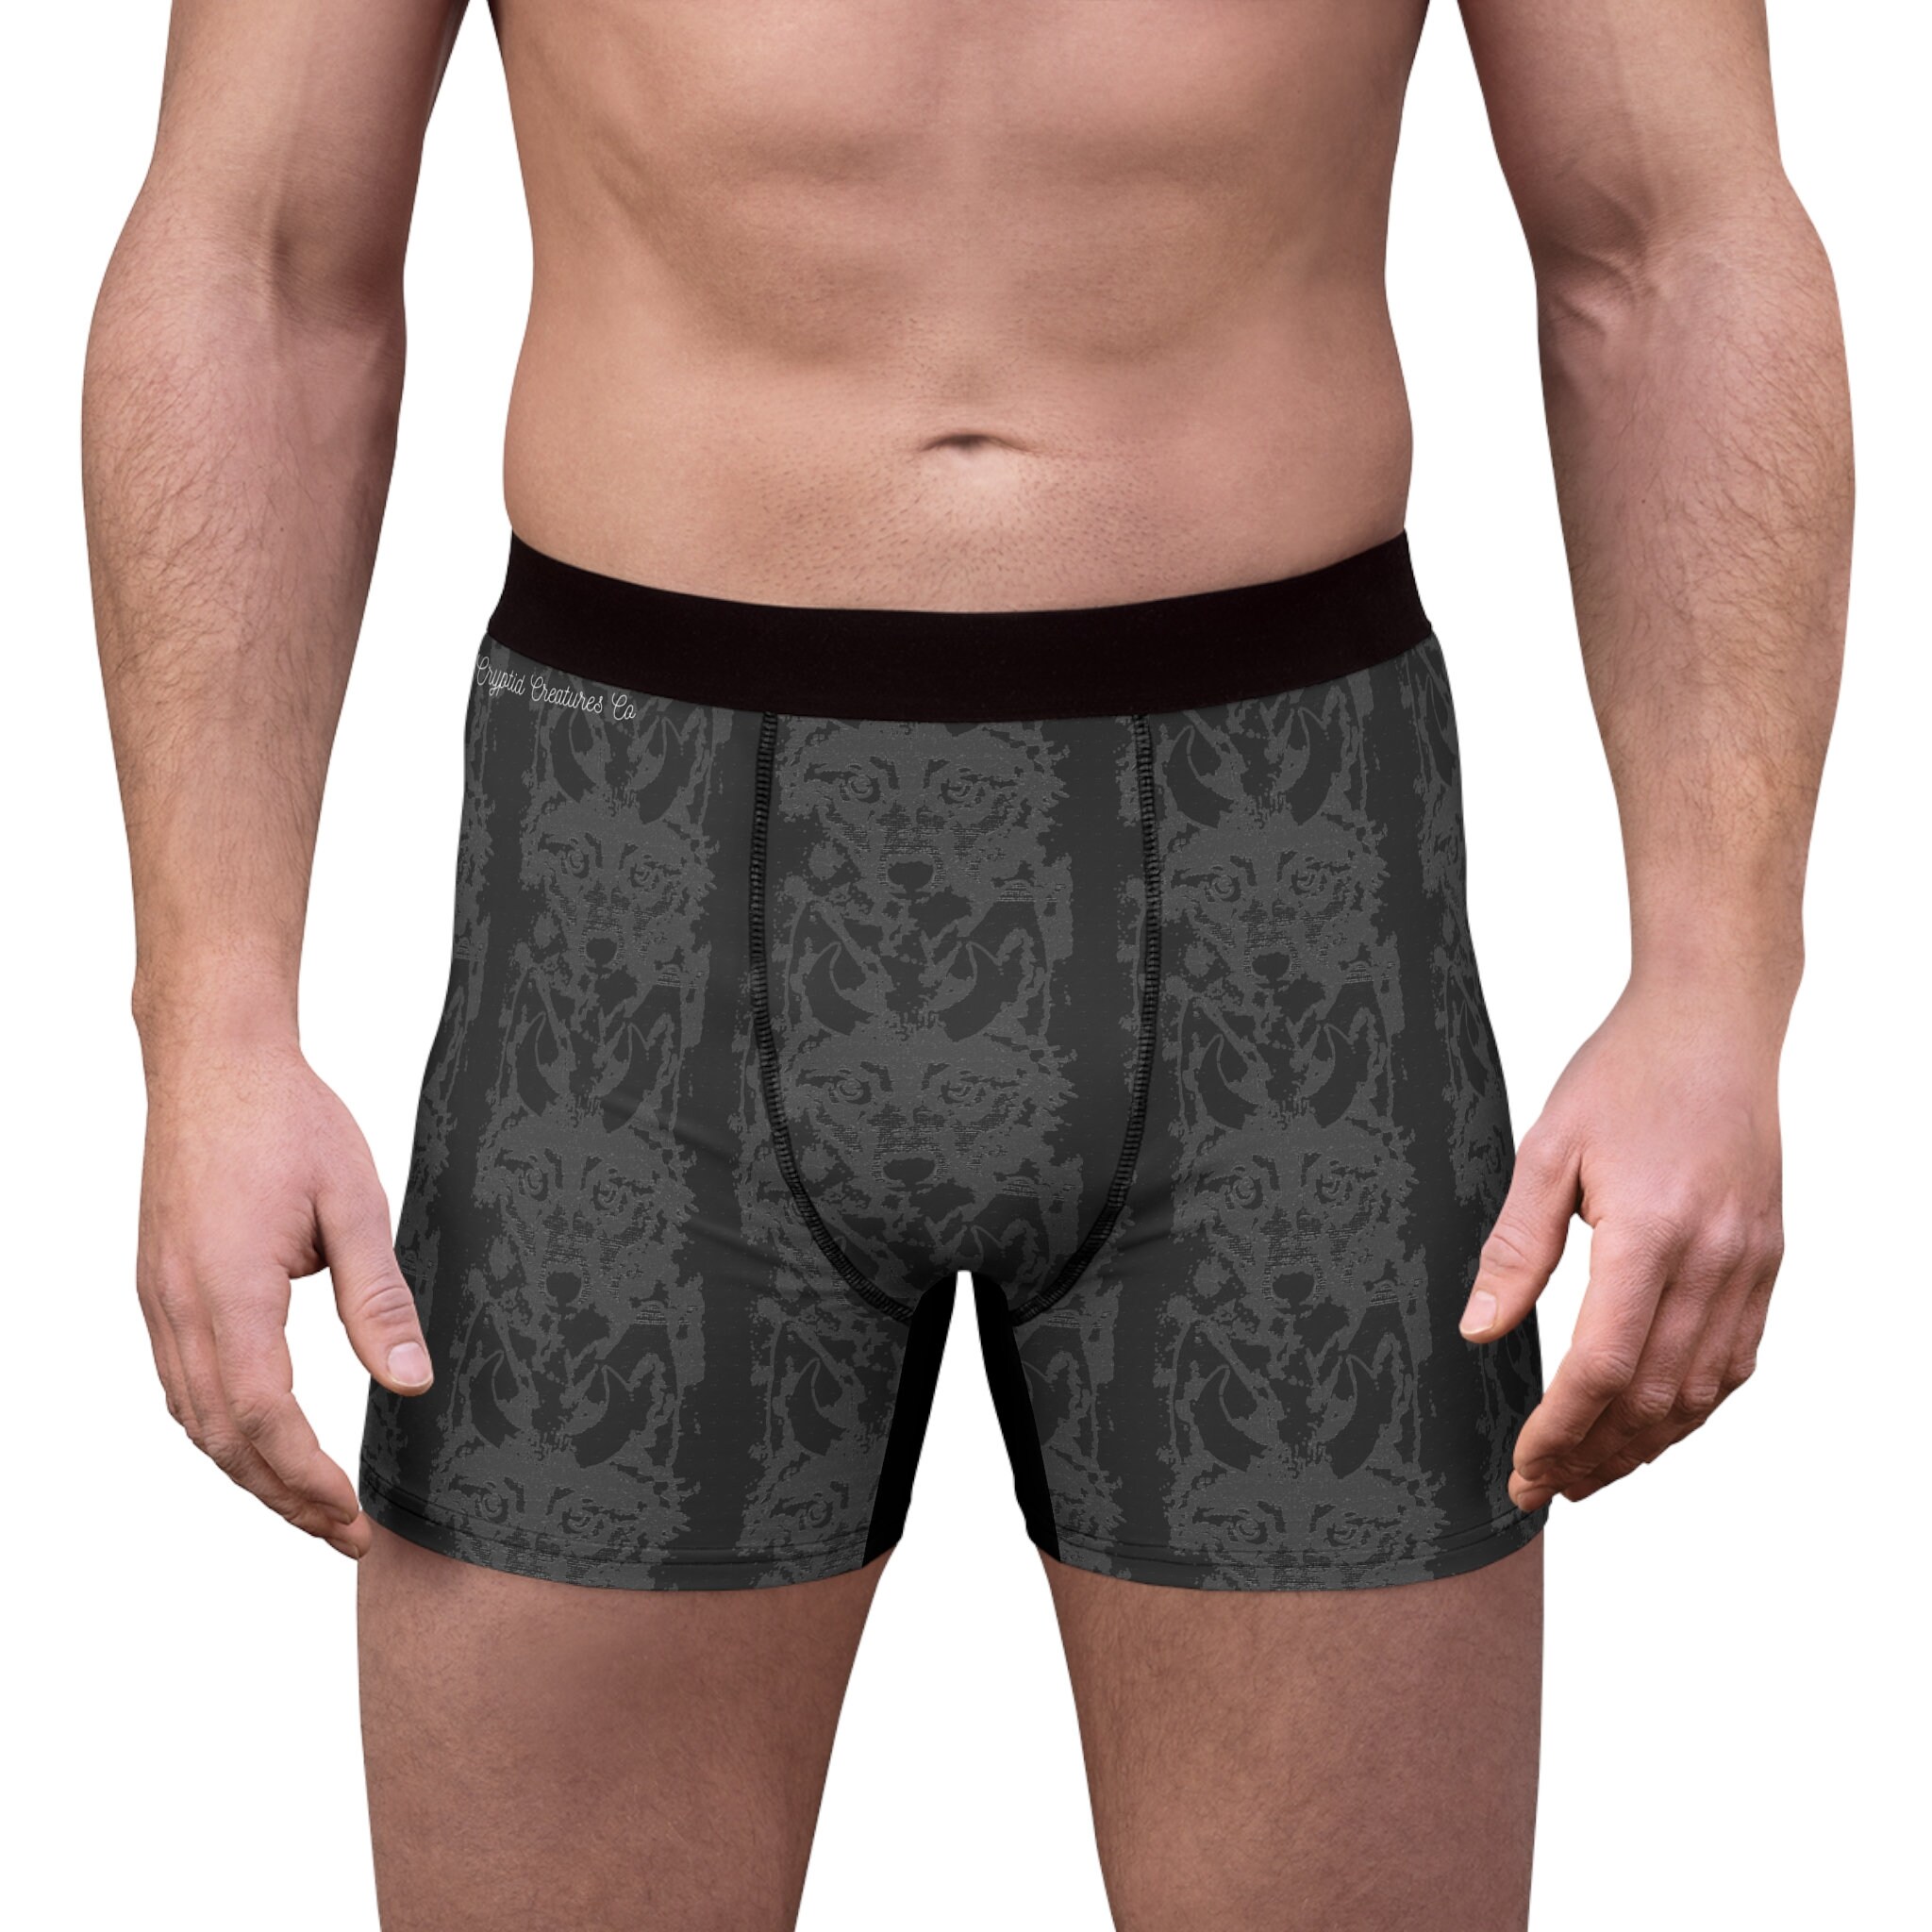 Couple briefs set with wolf print Perfect cotton underwear for him and her  Couple matching accessories Beautiful gift to couple anniversary